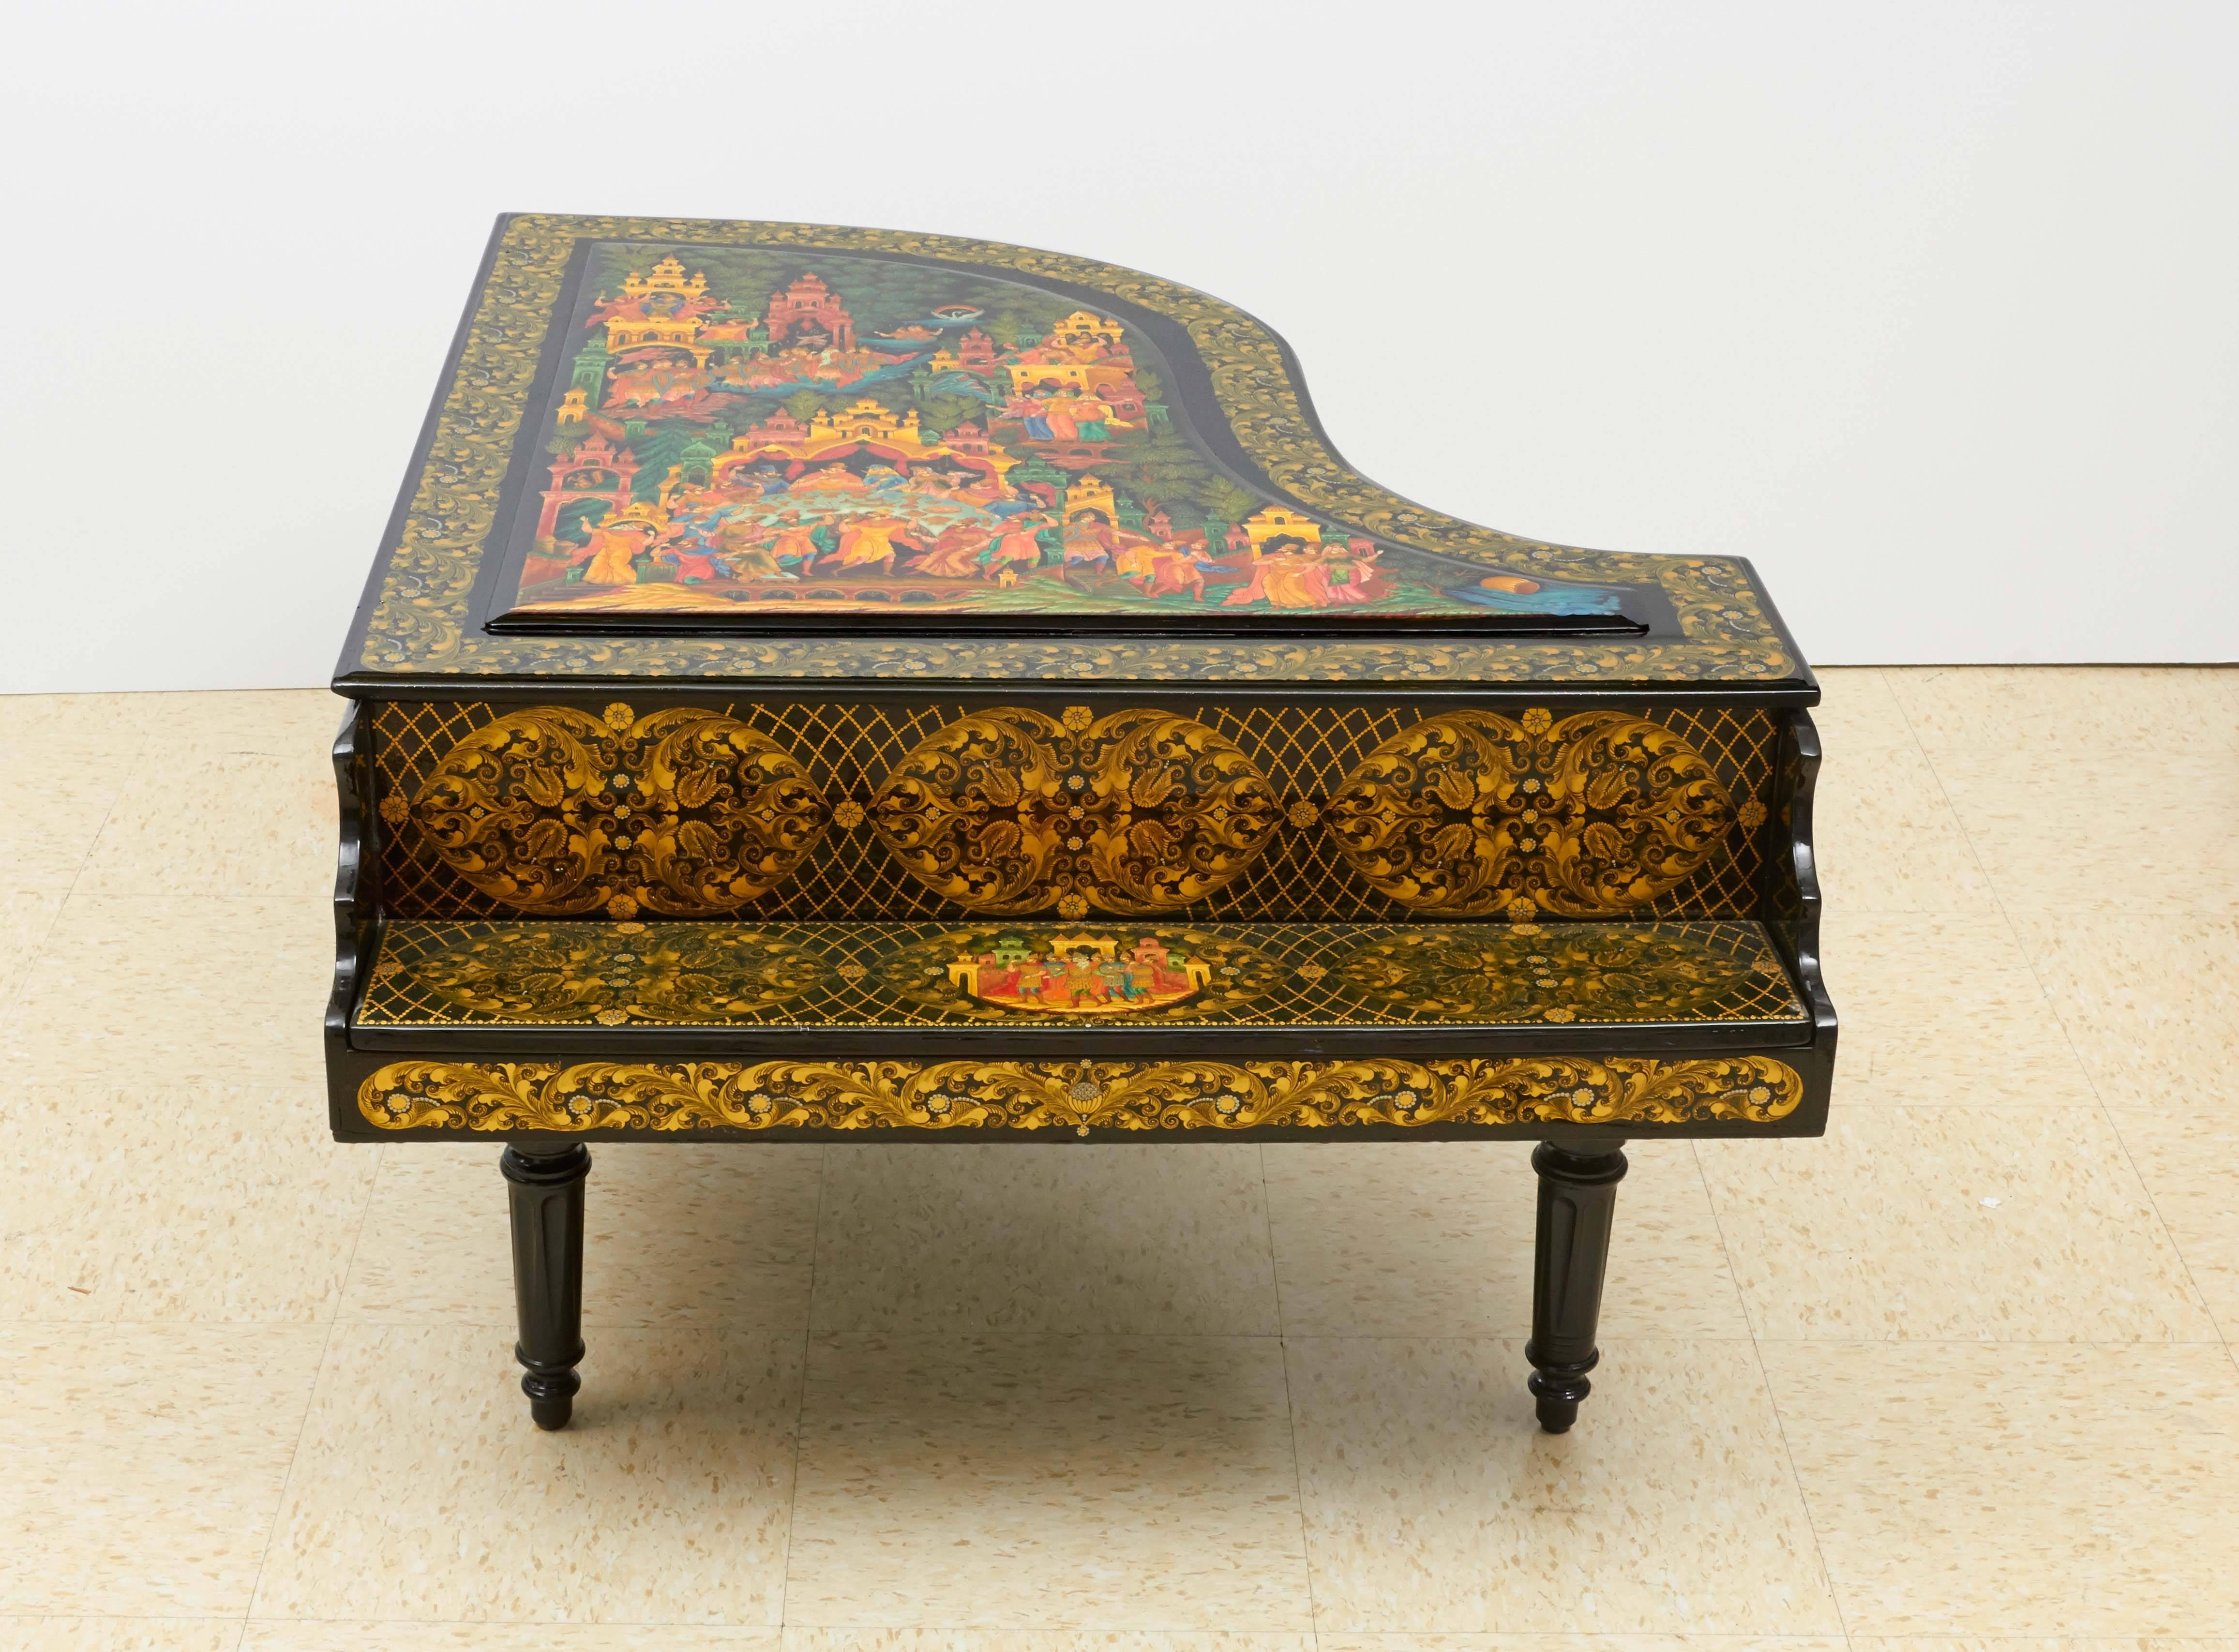 The beautiful wood lacquer box in piano form is hand-painted in oil-paint by a Russian artist from the Palekh village. It has exclusive quality of varnishing and polishing. 

